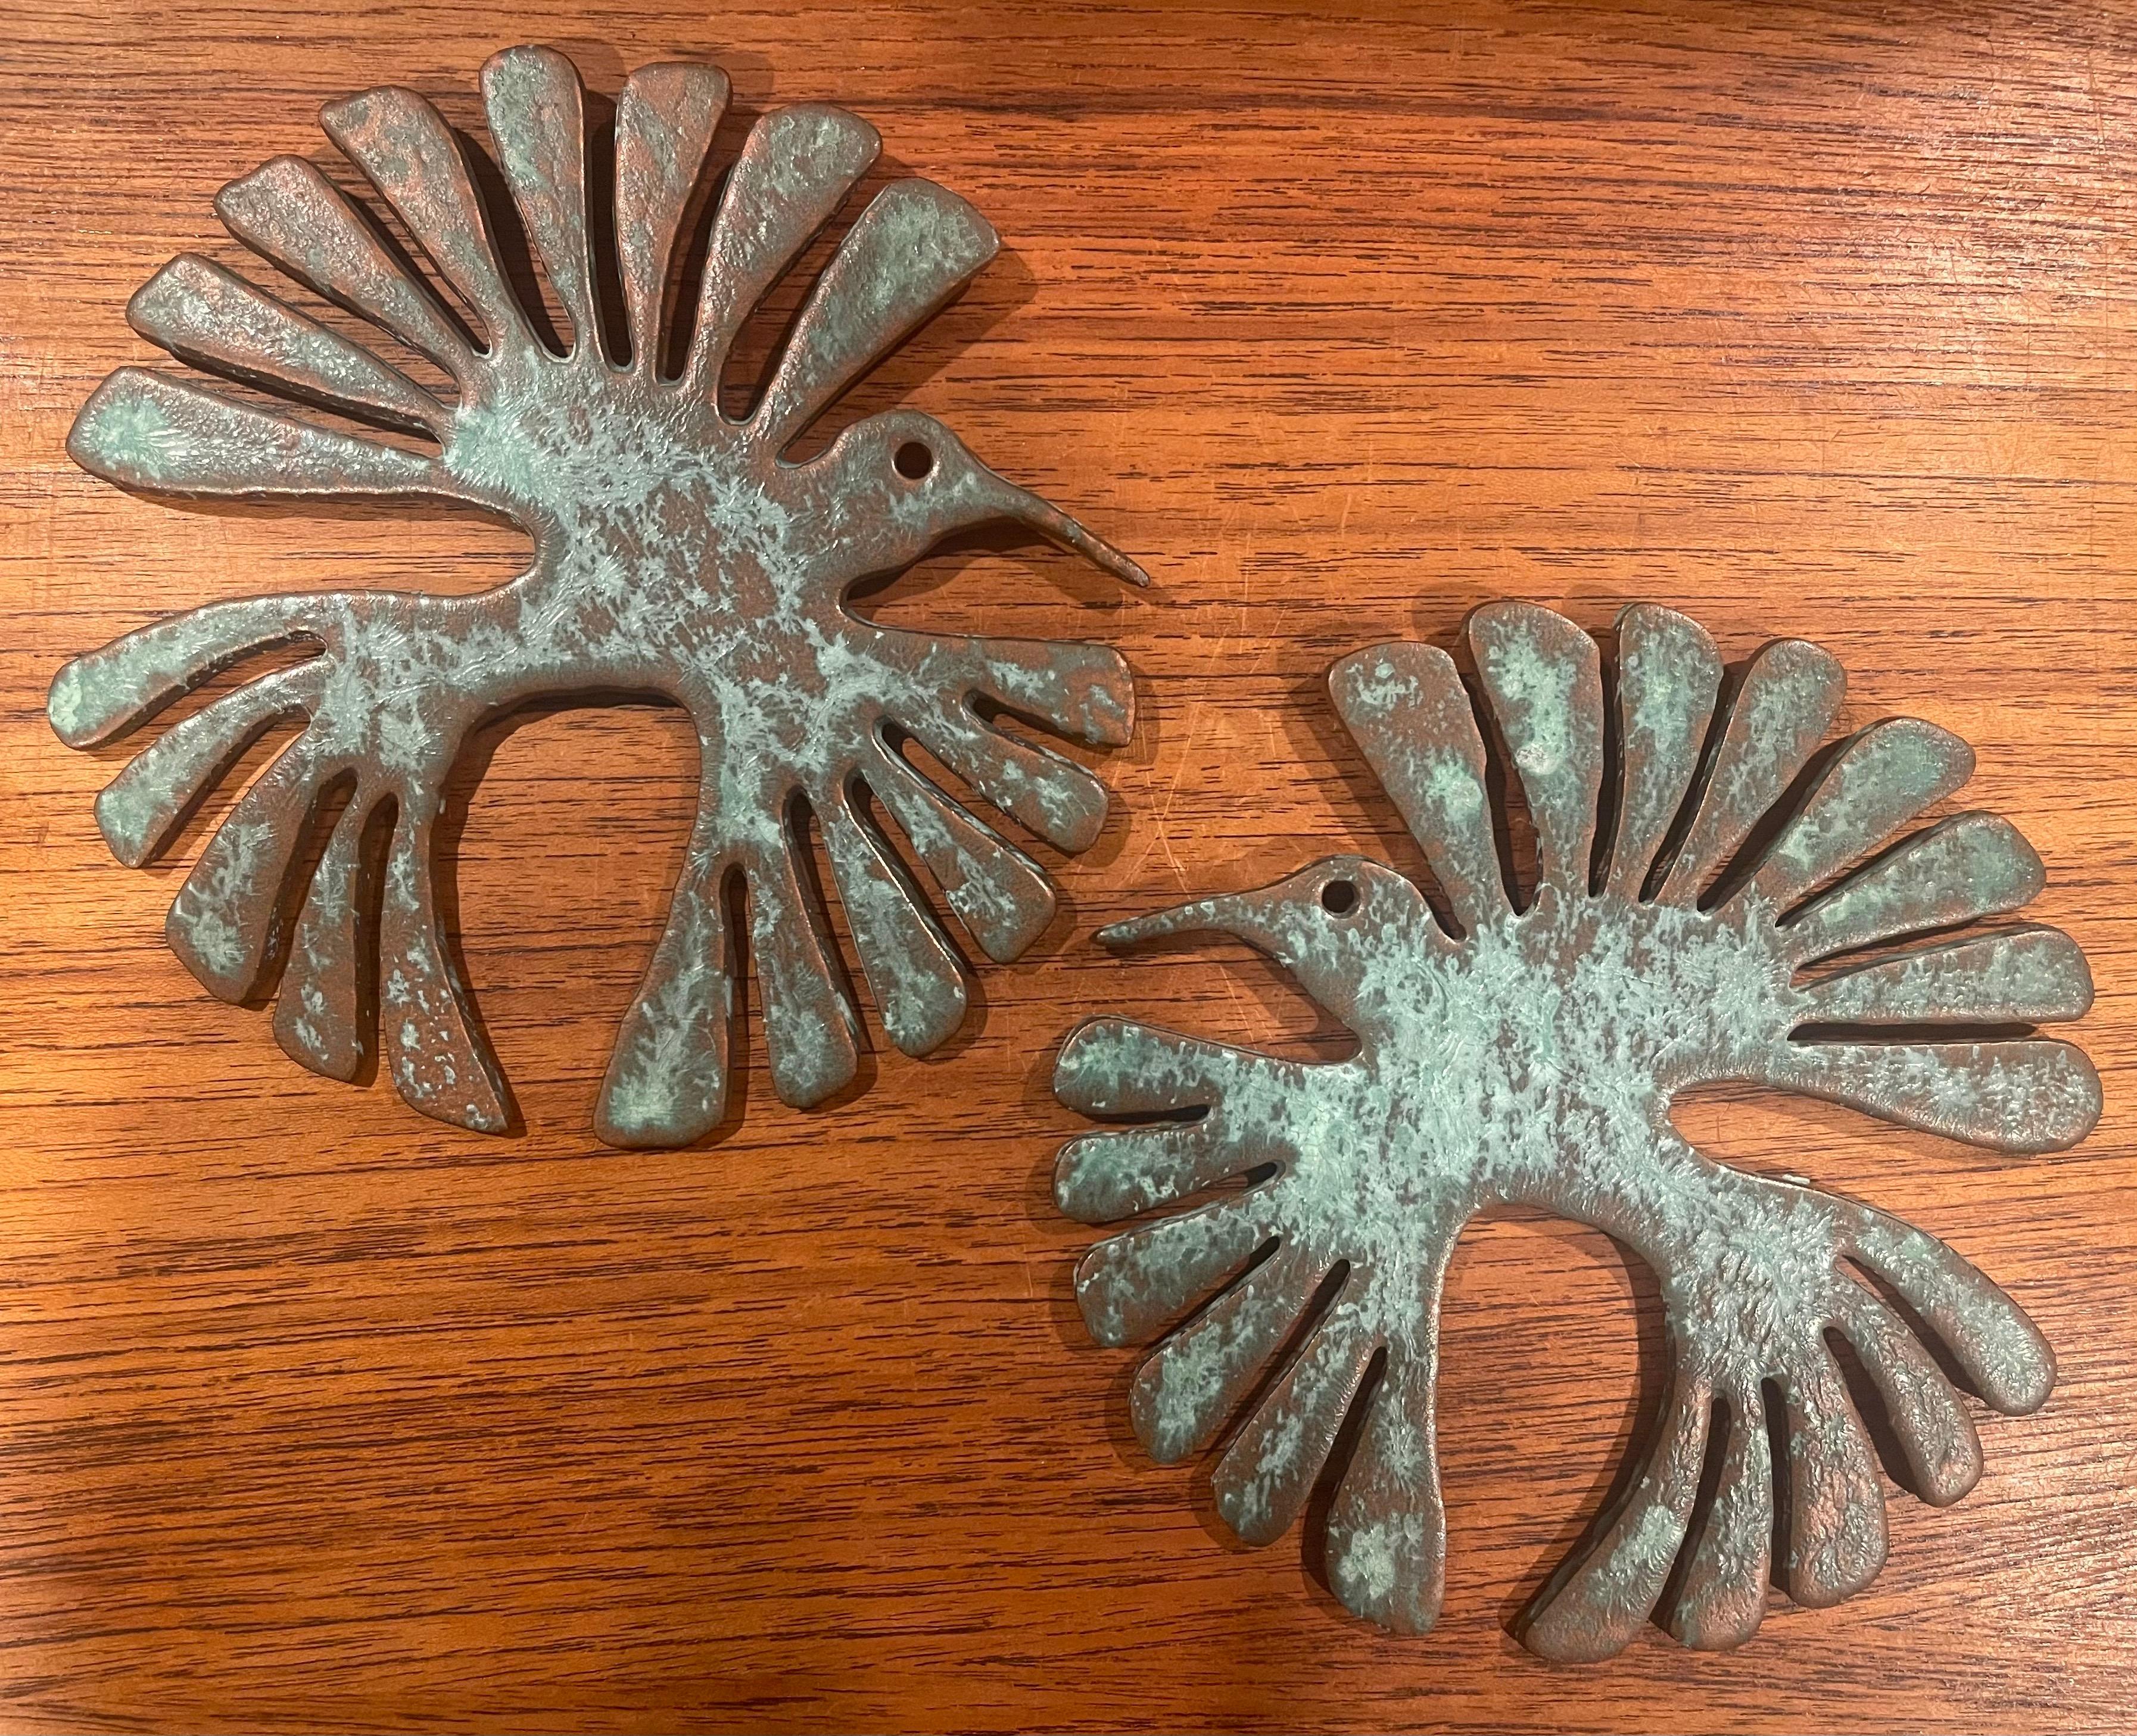 Pair of patinated bronze bird wall hangings with a verdigris finish, circa 1980s. The pair are in very good condition with nice detail and a gorgeous patina. Each bird measures 6